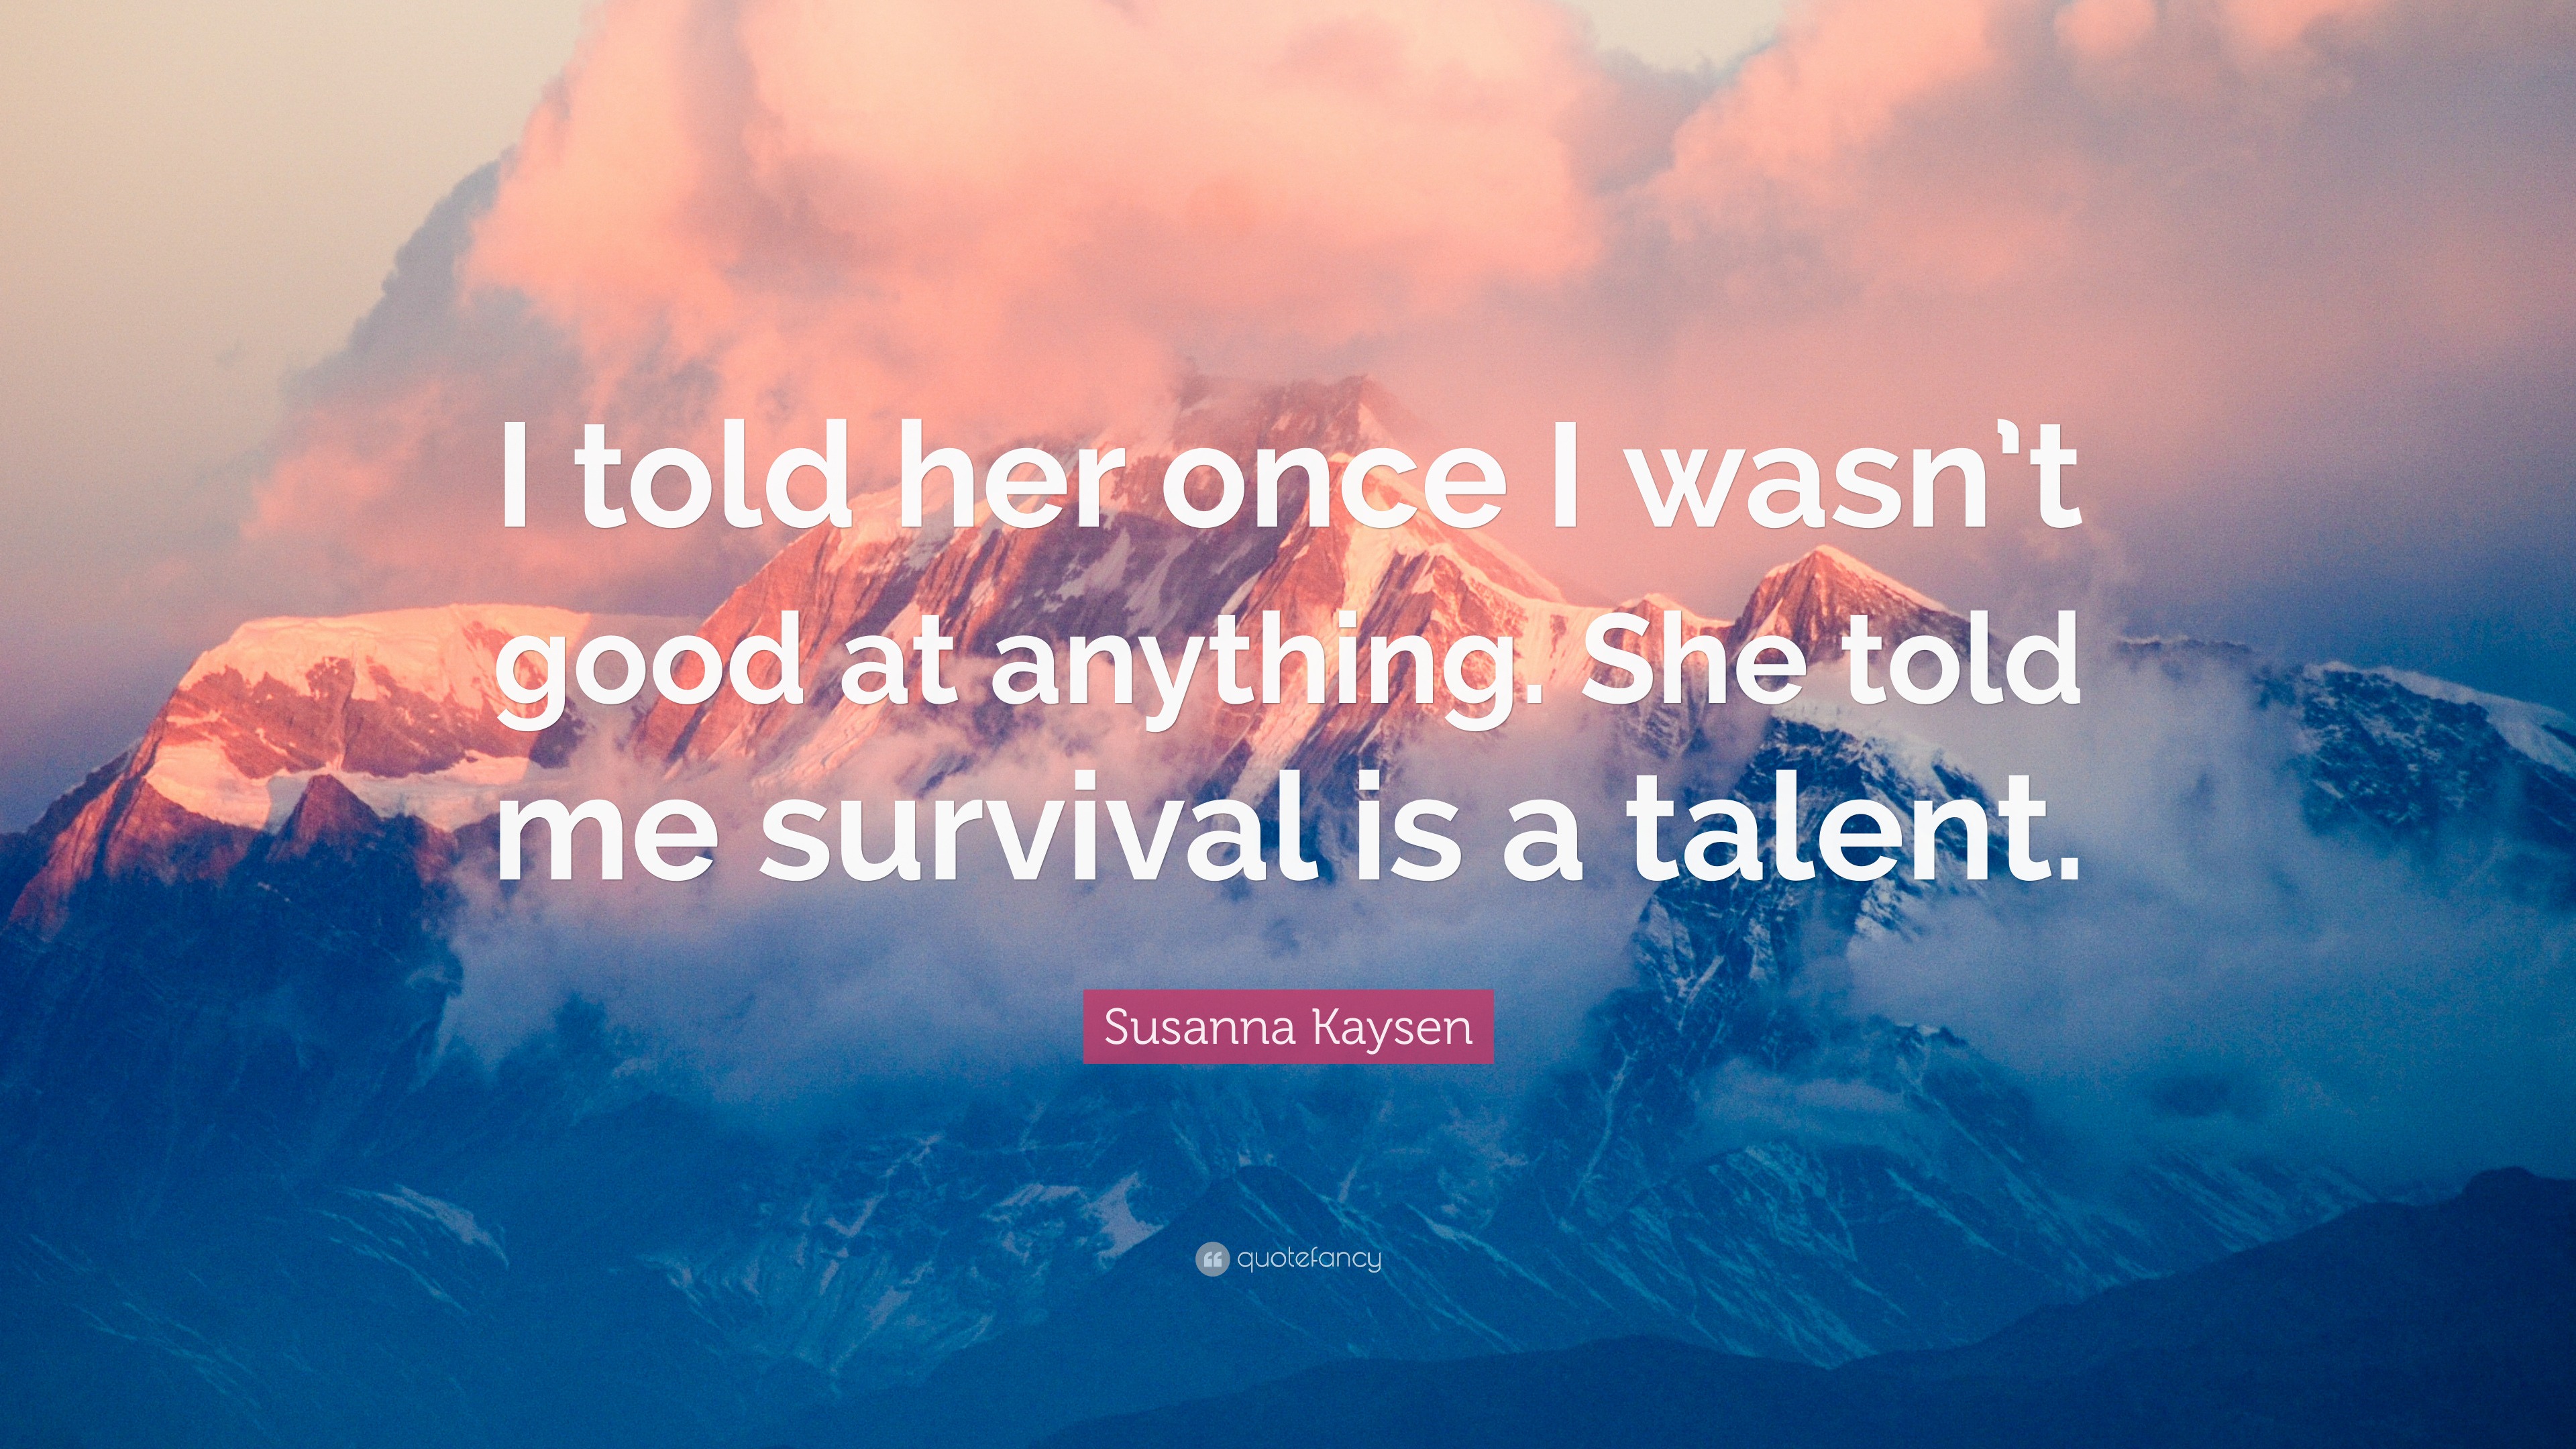 Susanna Kaysen Quote: “I told her once I wasn’t good at anything. She ...